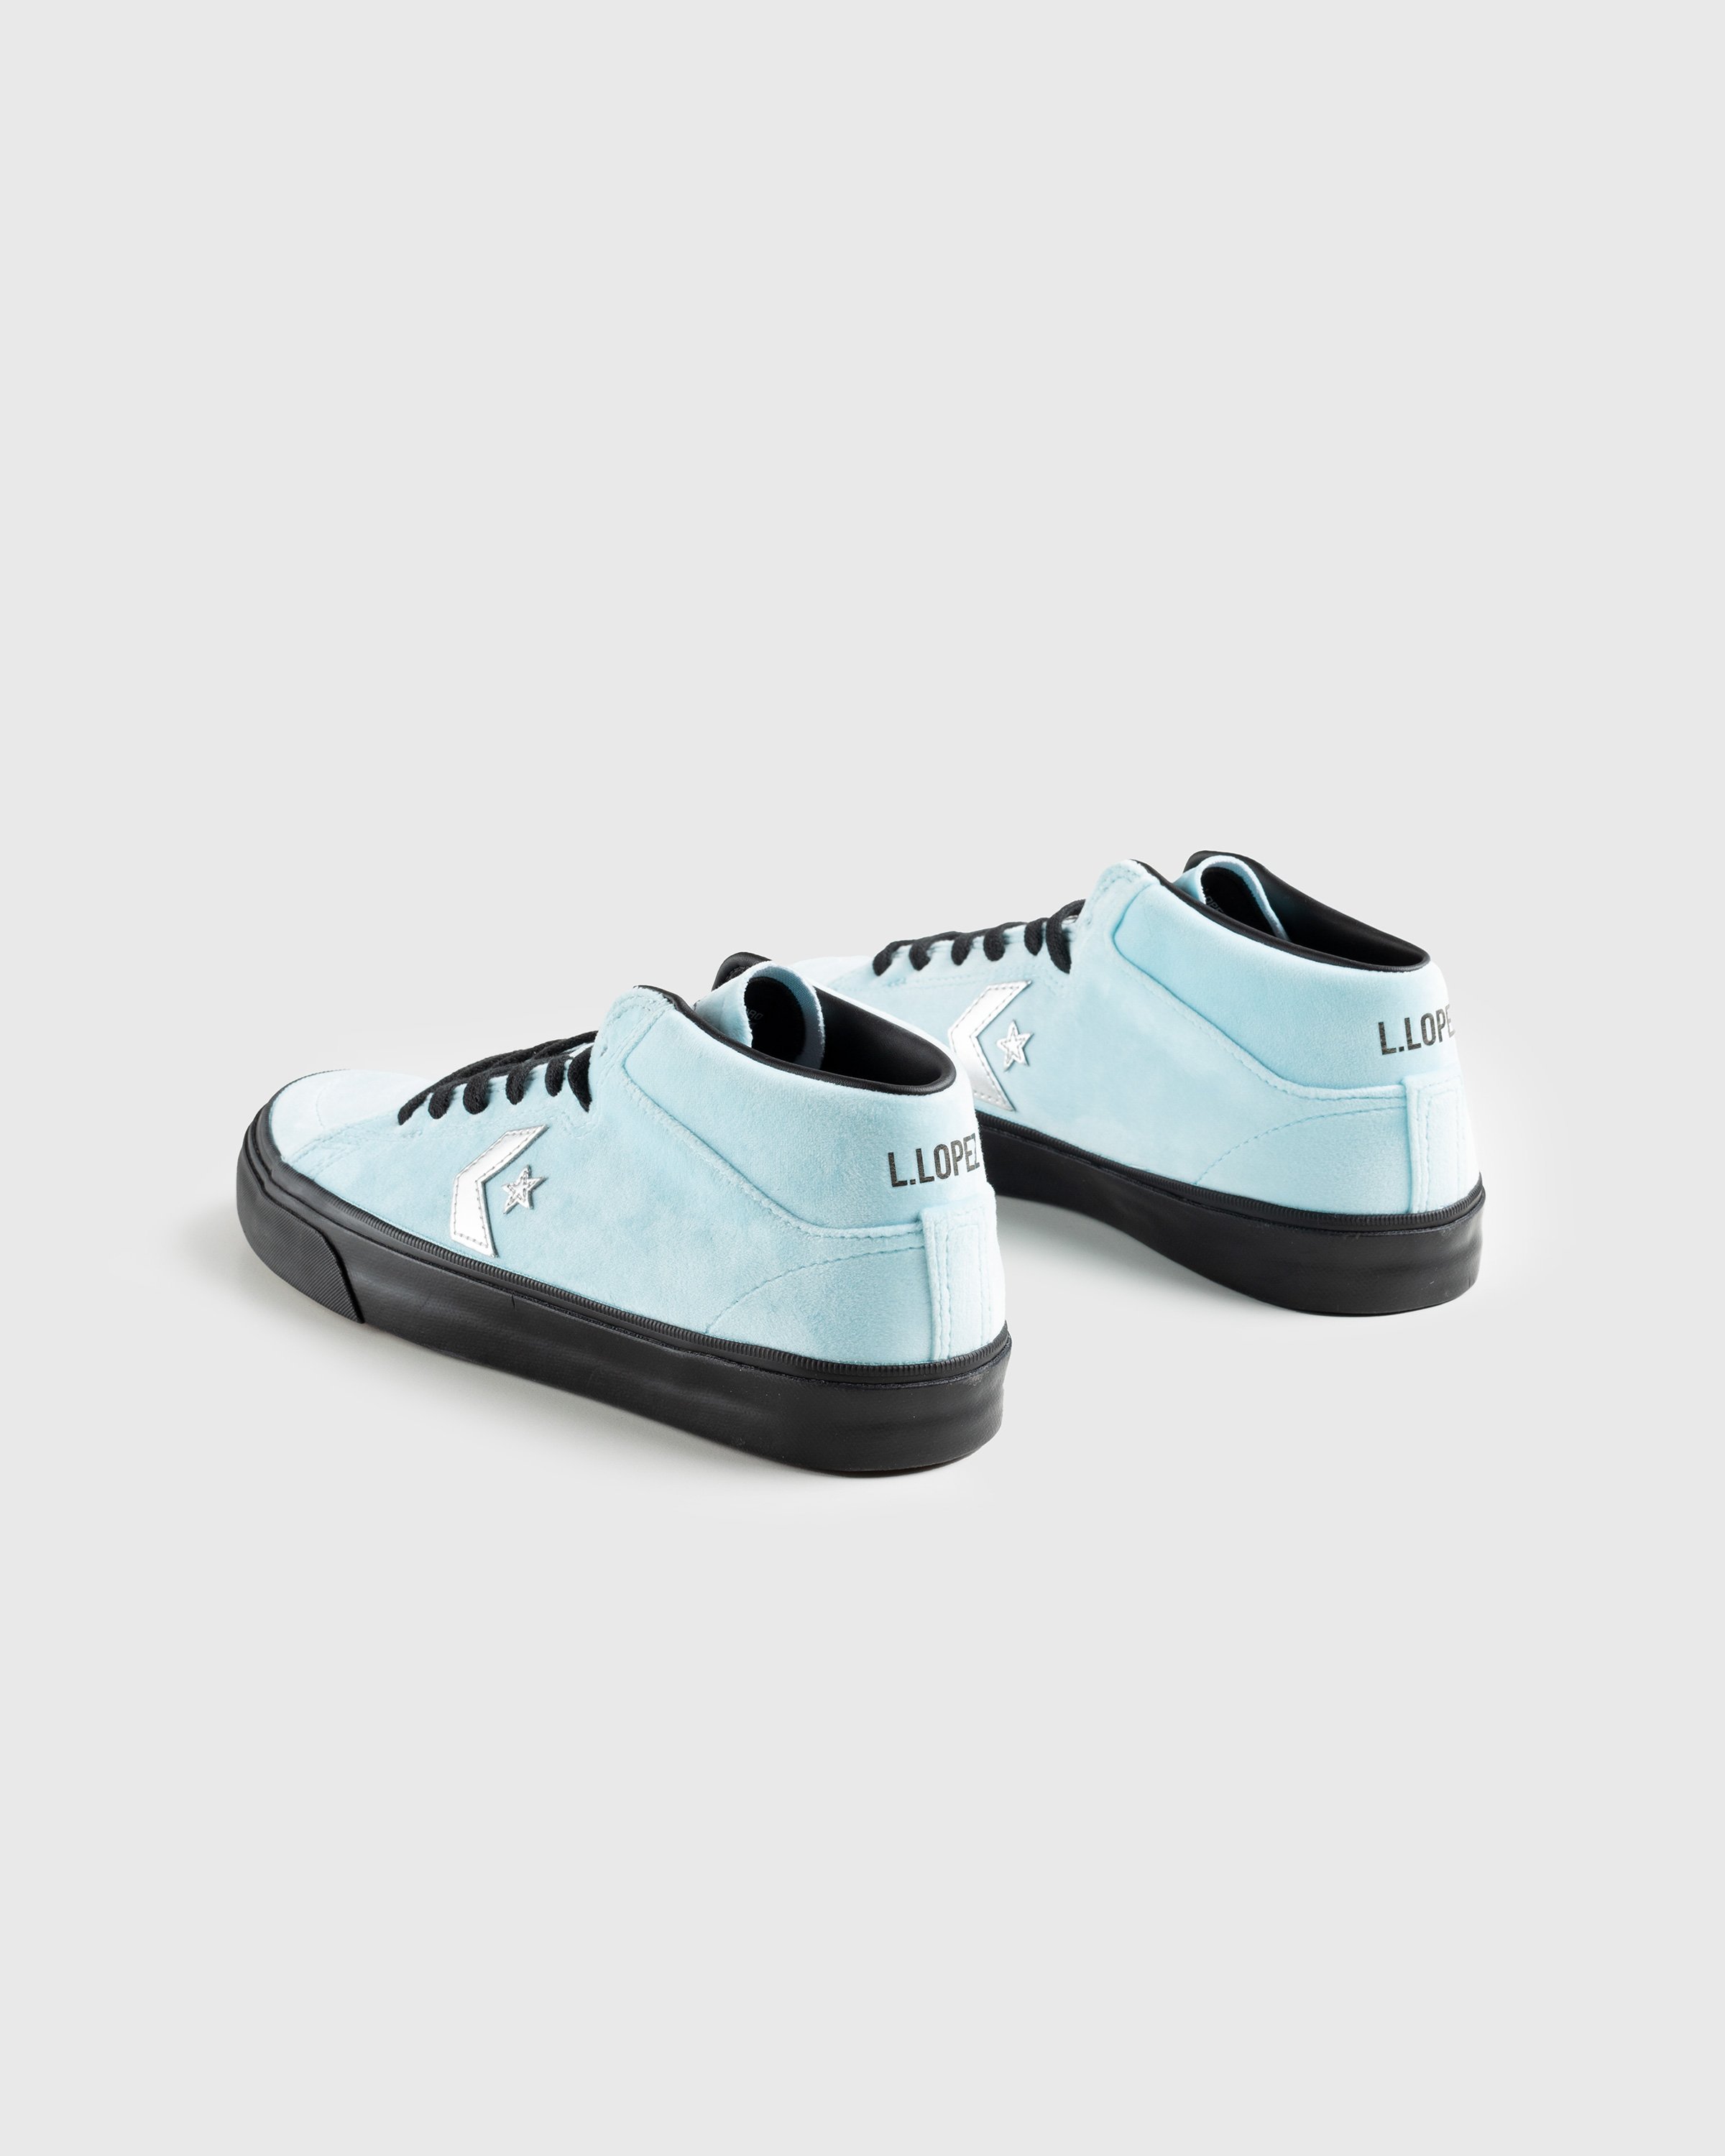 Converse x Fucking Awesome - Louie Lopez Pro Mid Cyan Tint/Black - Footwear - Blue - Image 4